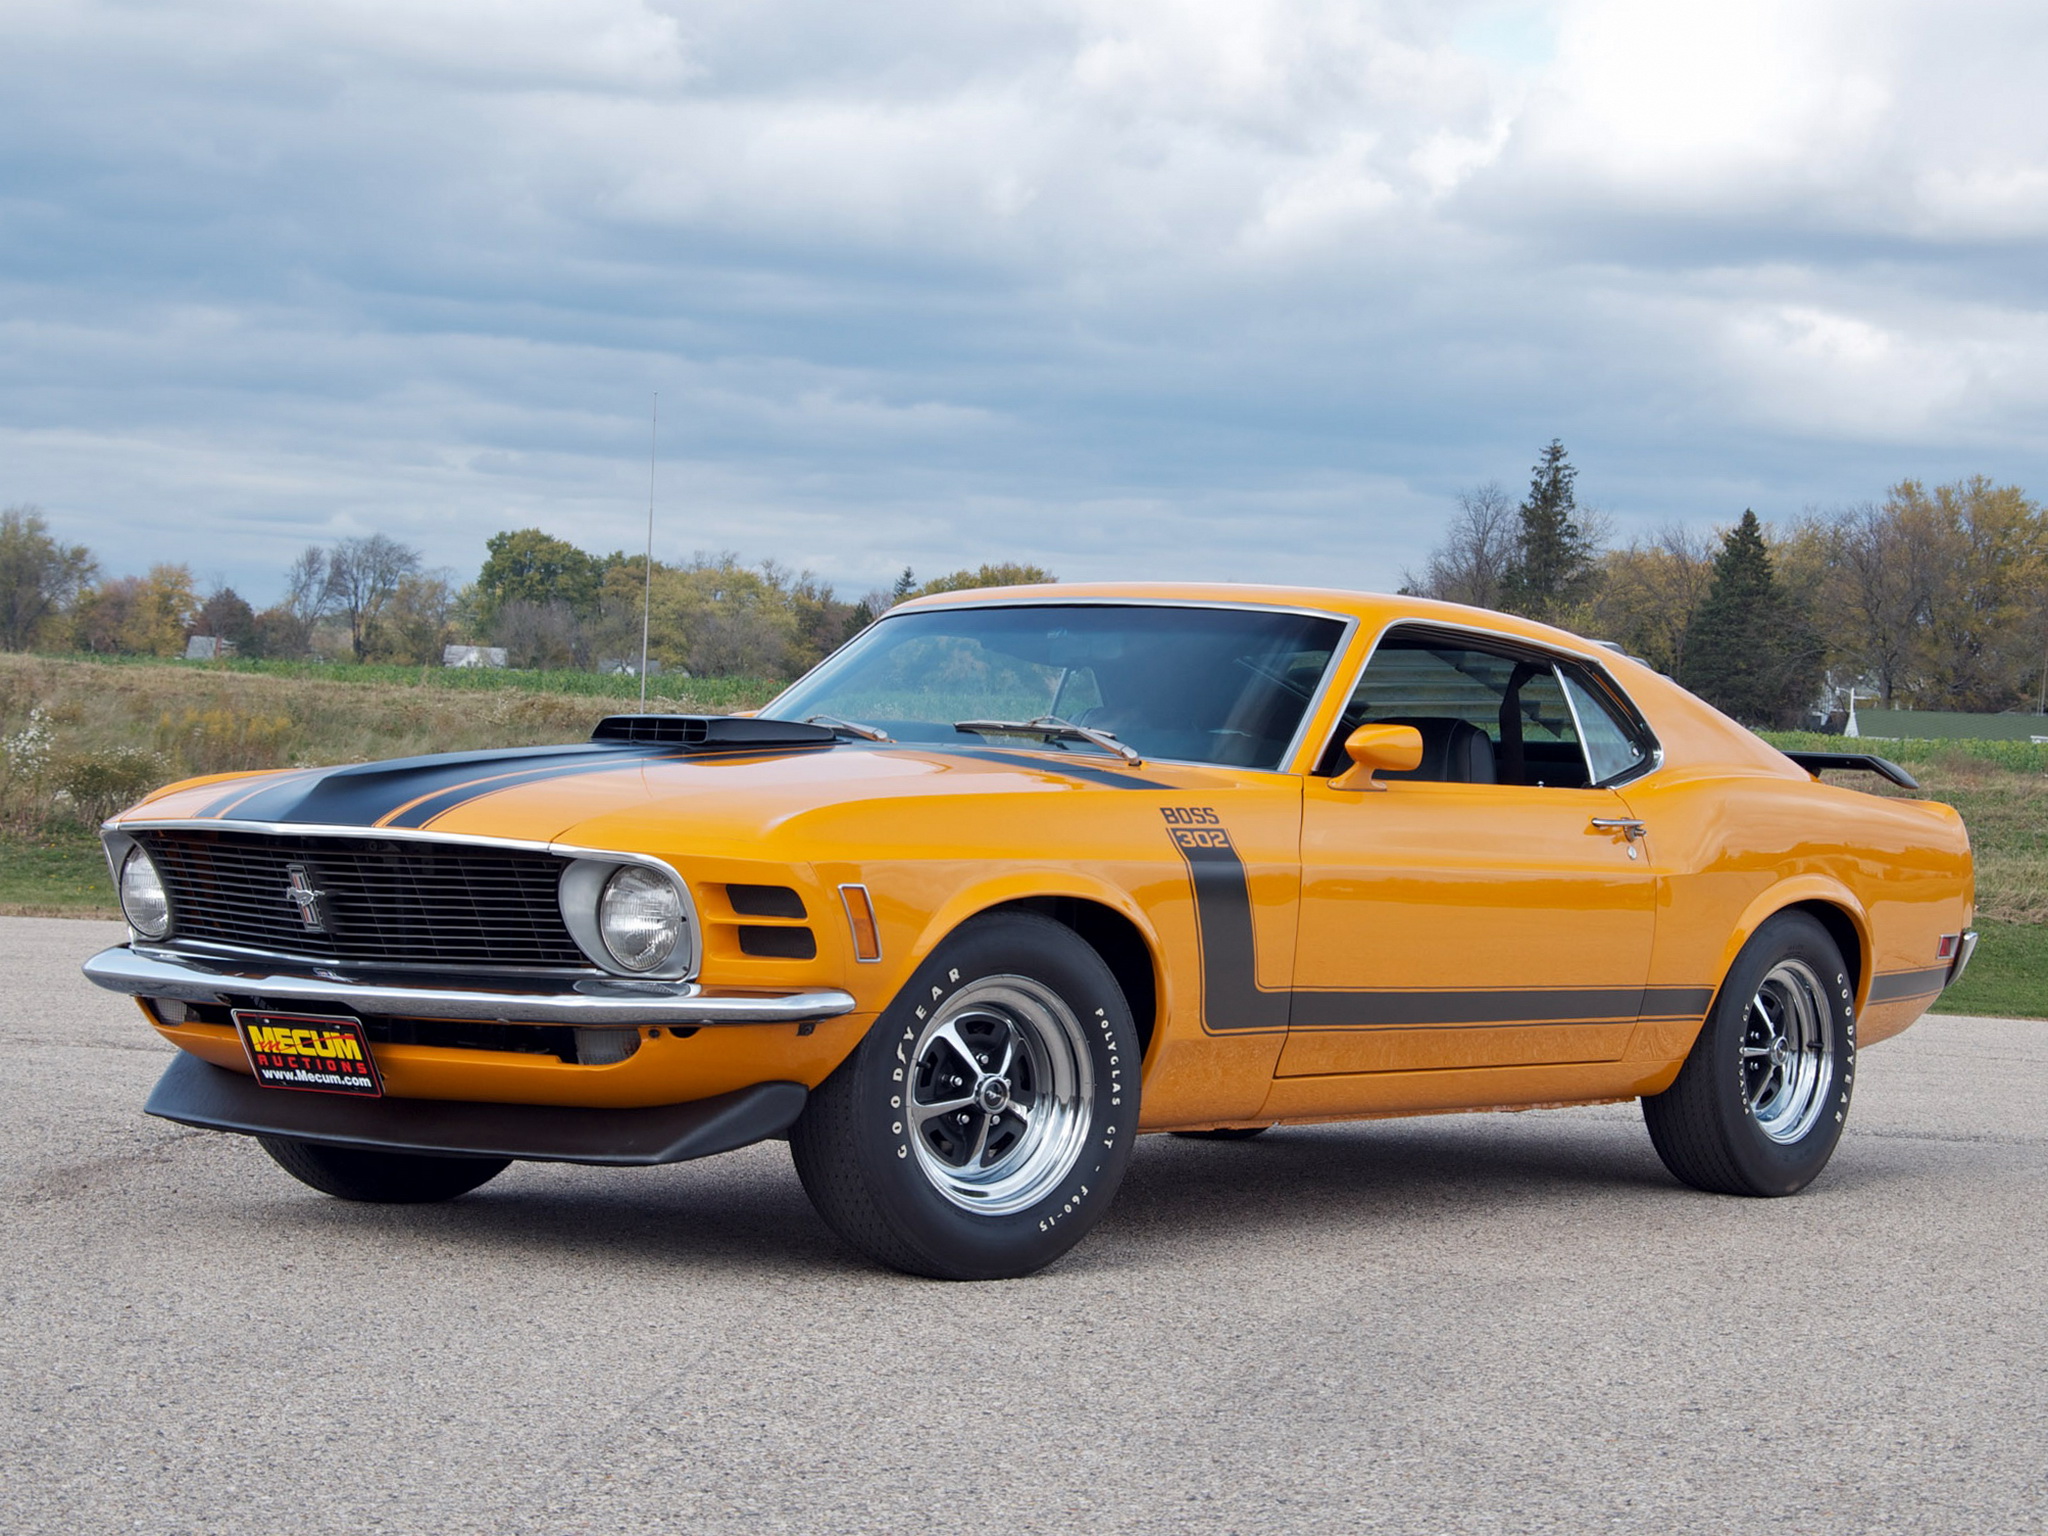 Ford Mustang Boss 302 1970 - image #108